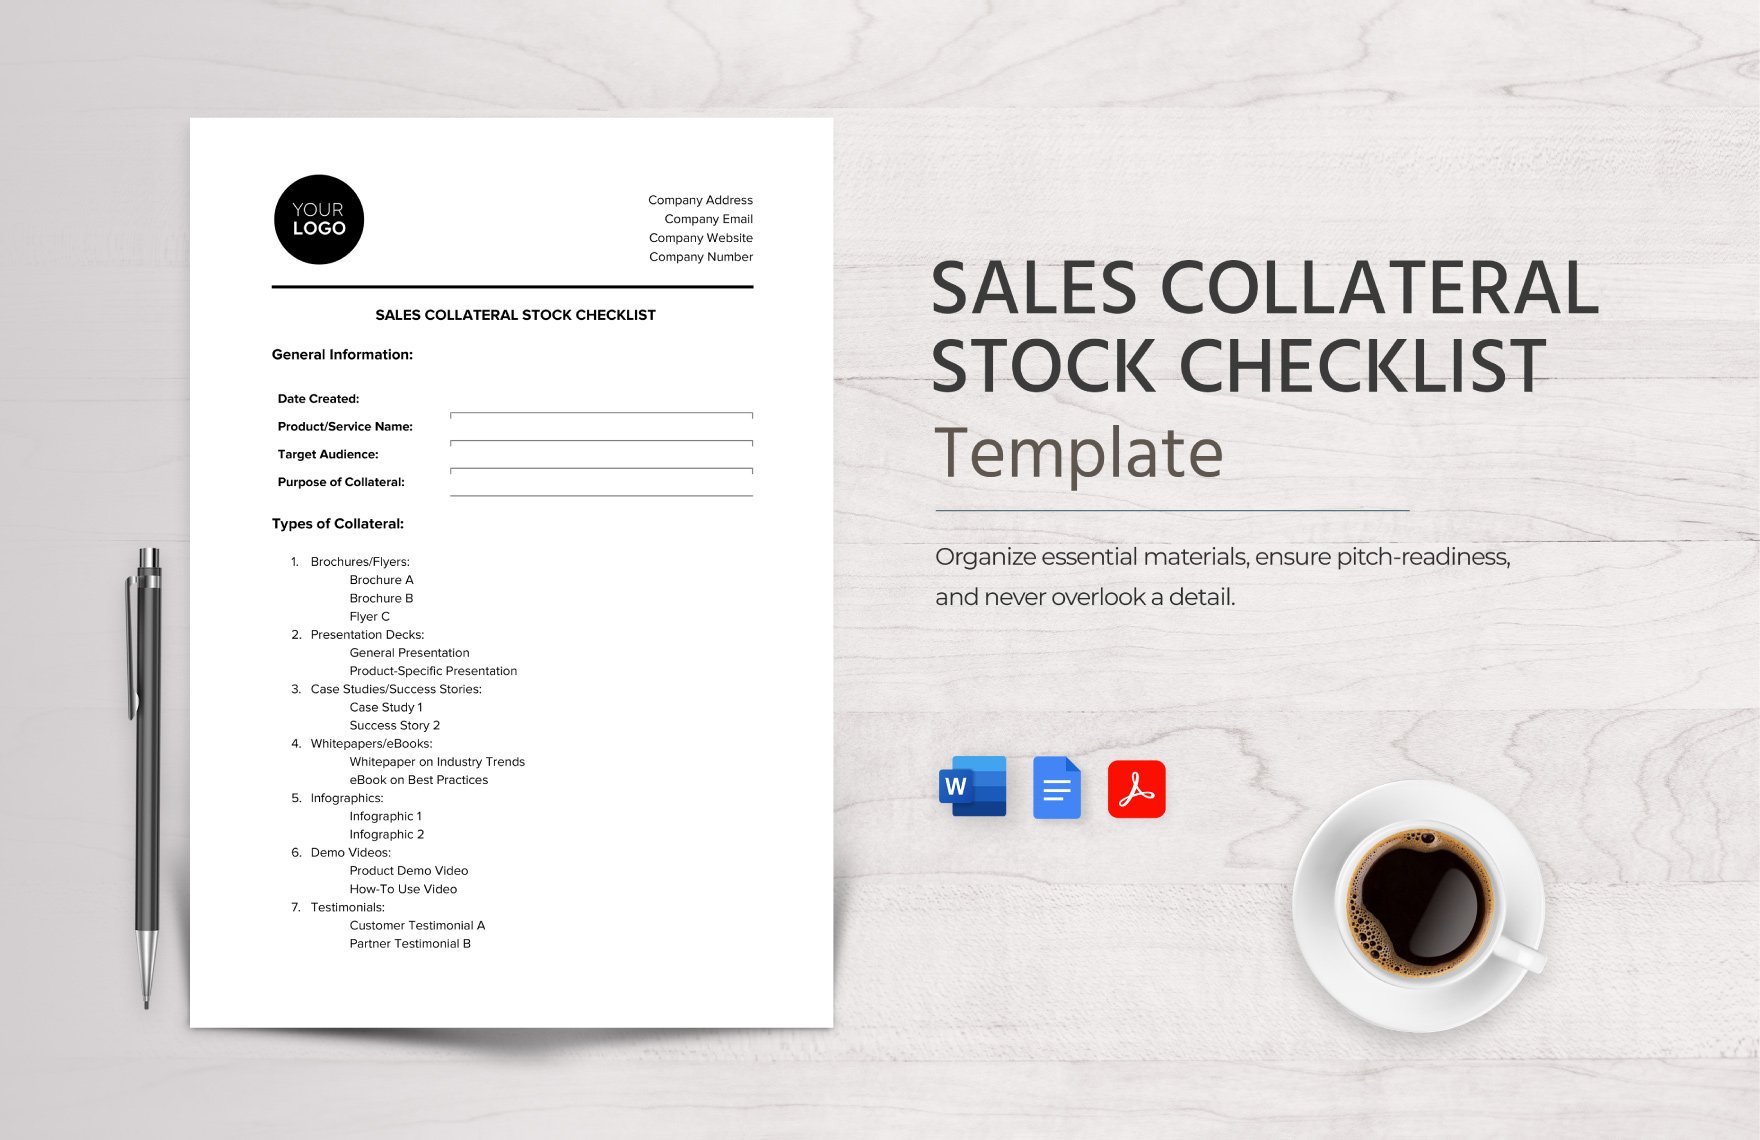 Sales Collateral Stock Checklist Template in Word, Google Docs, PDF